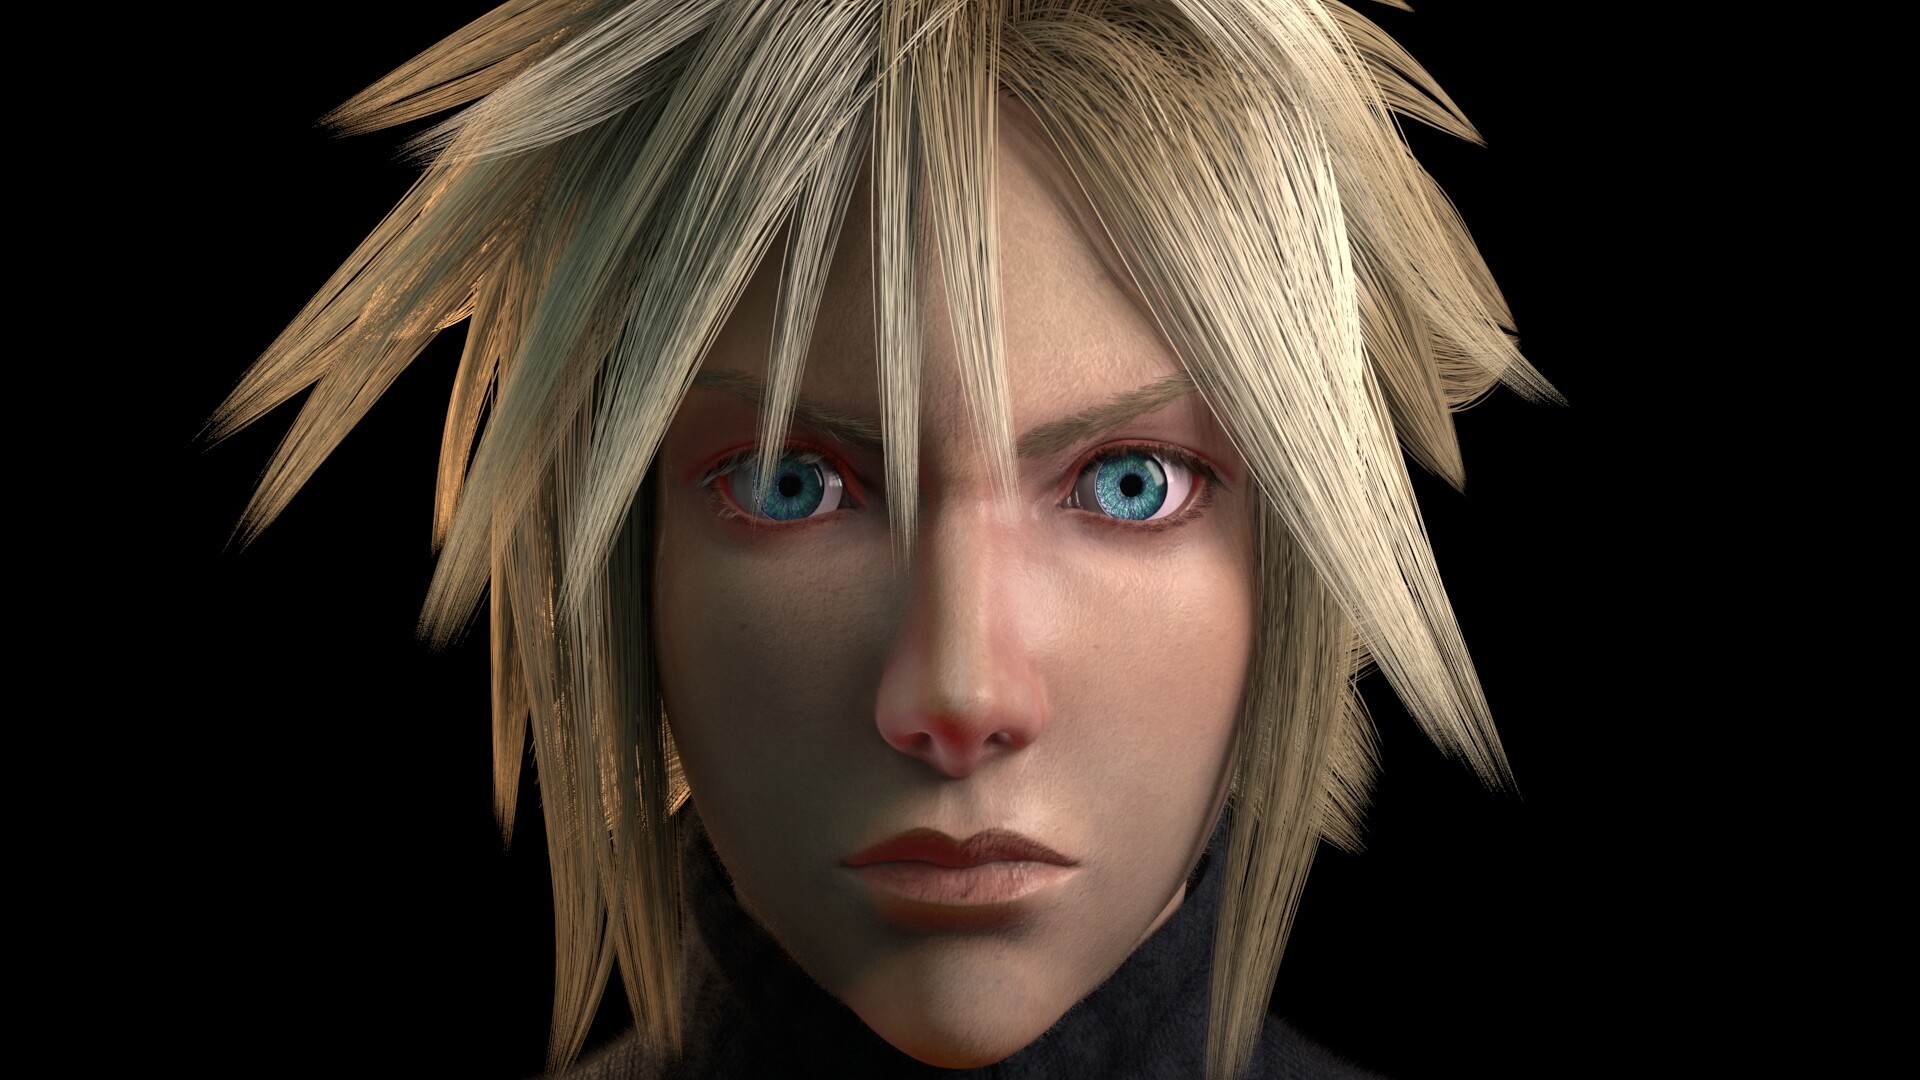 Final Fantasy VII Remake: How to Get Blue Hair for Cloud Strife - wide 6